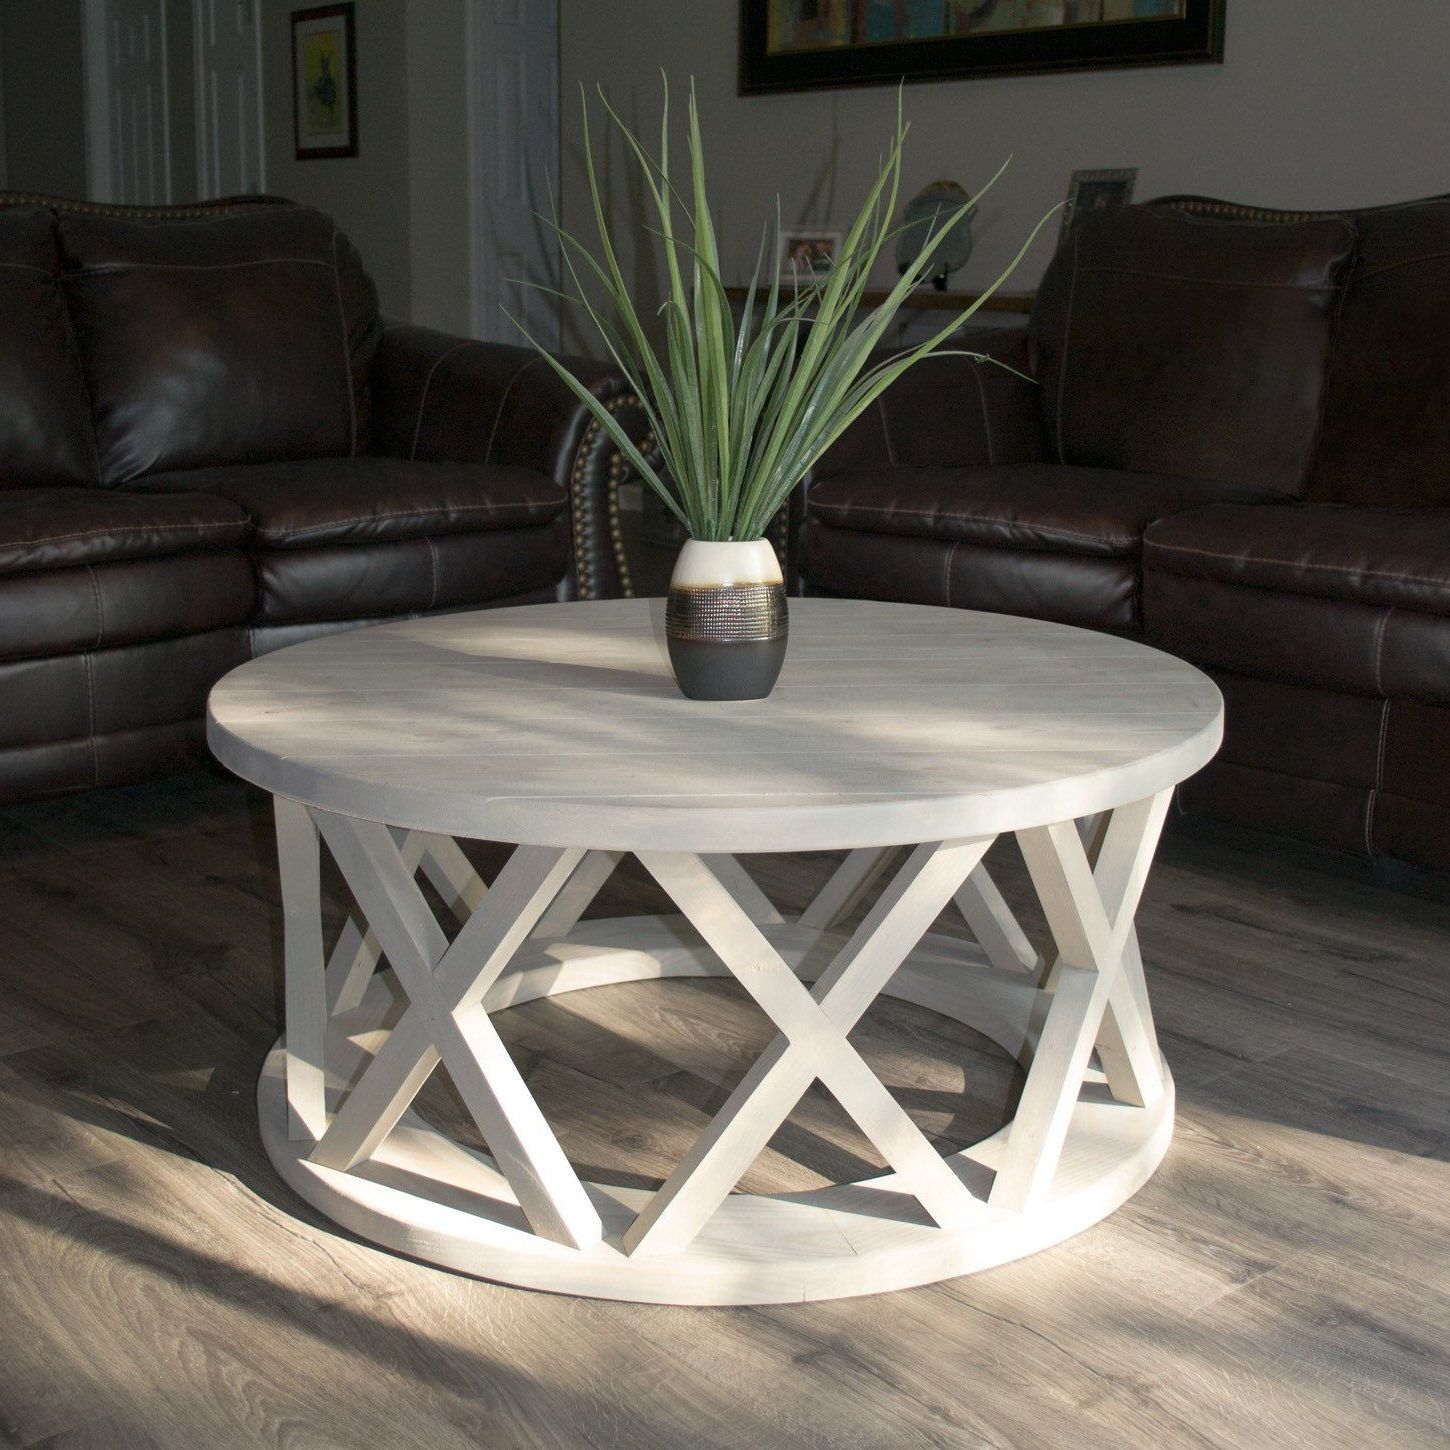 Rustic Wood Coffee Table Round / Harper&bright Designs Industrial Big With White T Base Seminar Coffee Tables (View 16 of 20)